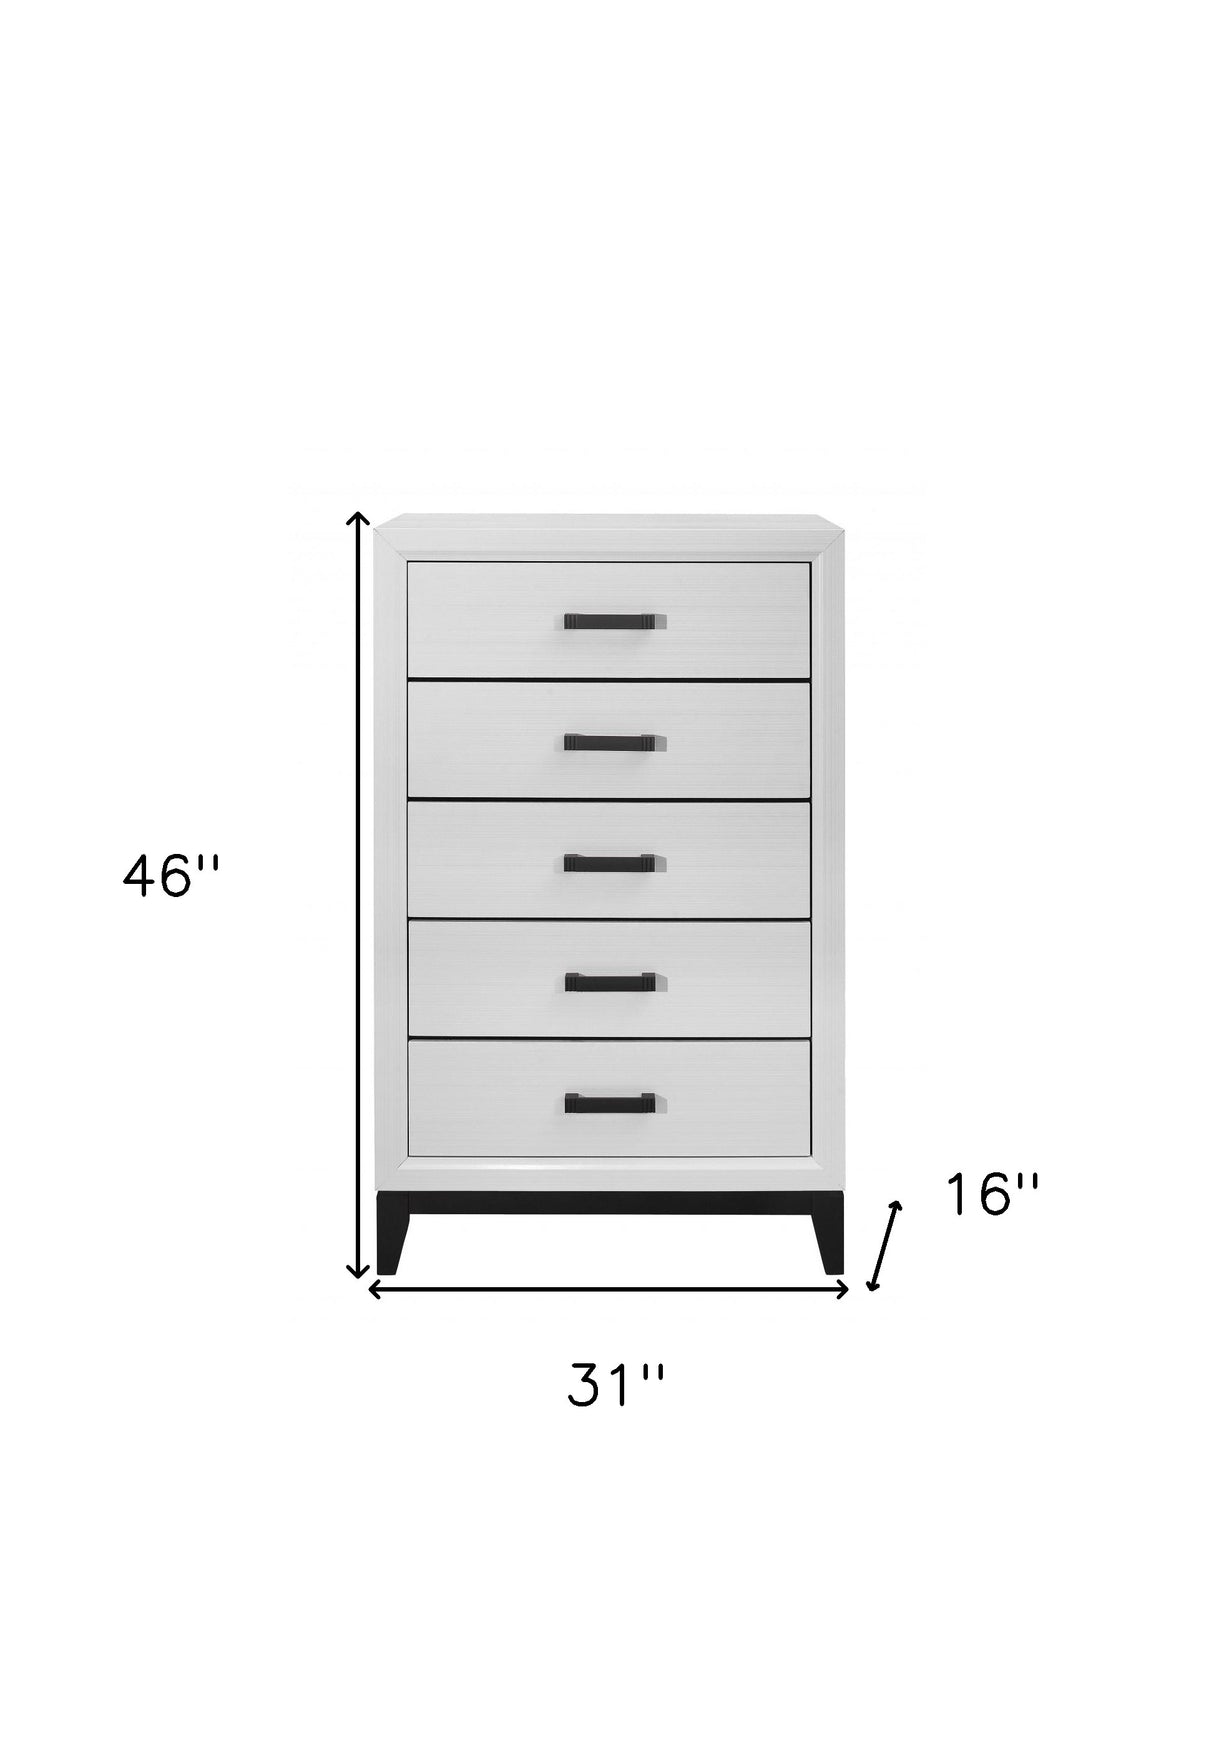 31" White Wood Five Drawer Standard Chest